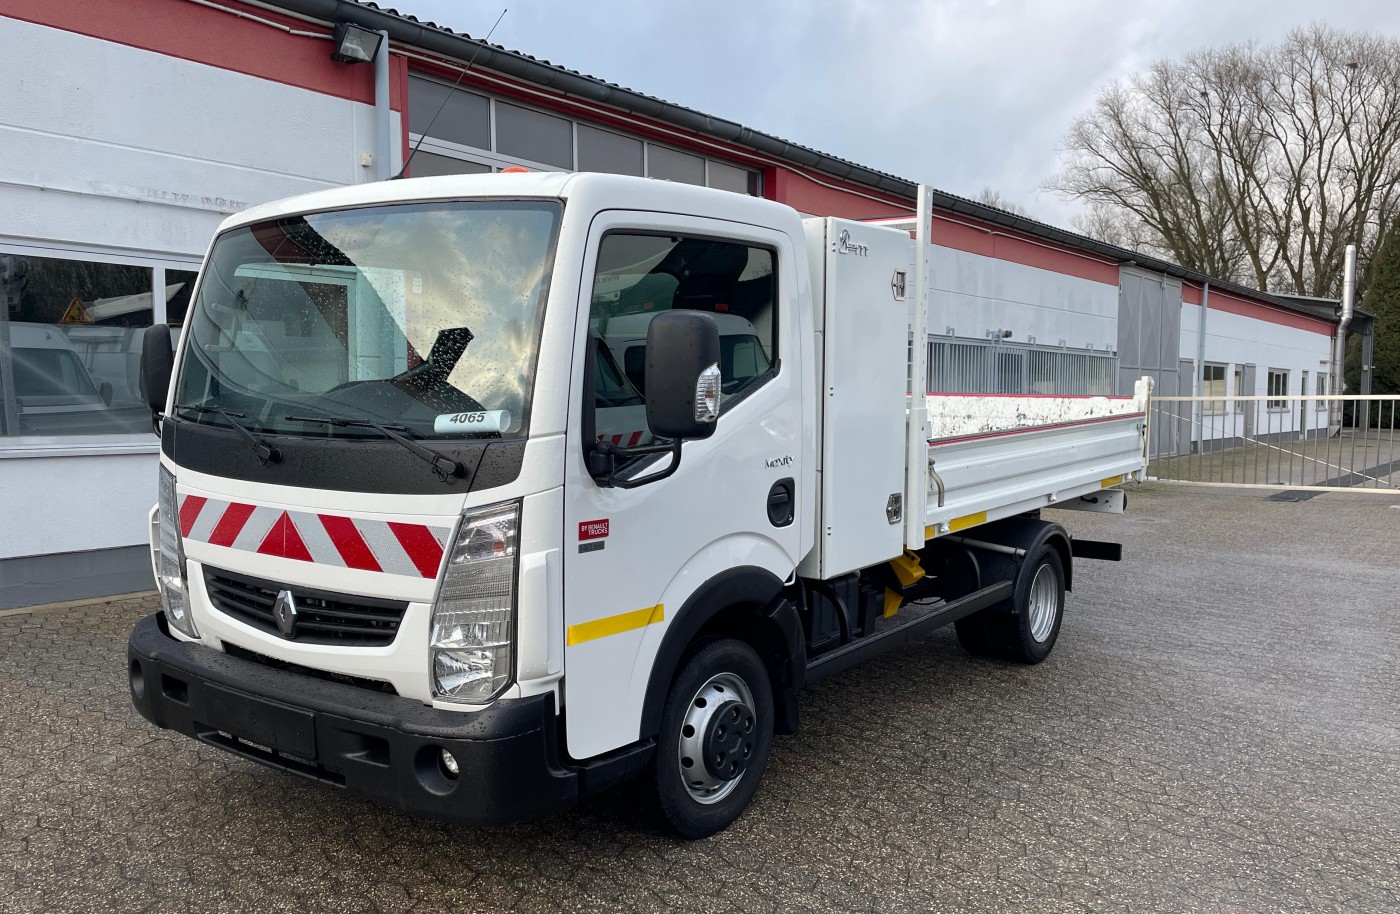  - Maxity 140 DXI tipper 3 seats 1125 kg payload!